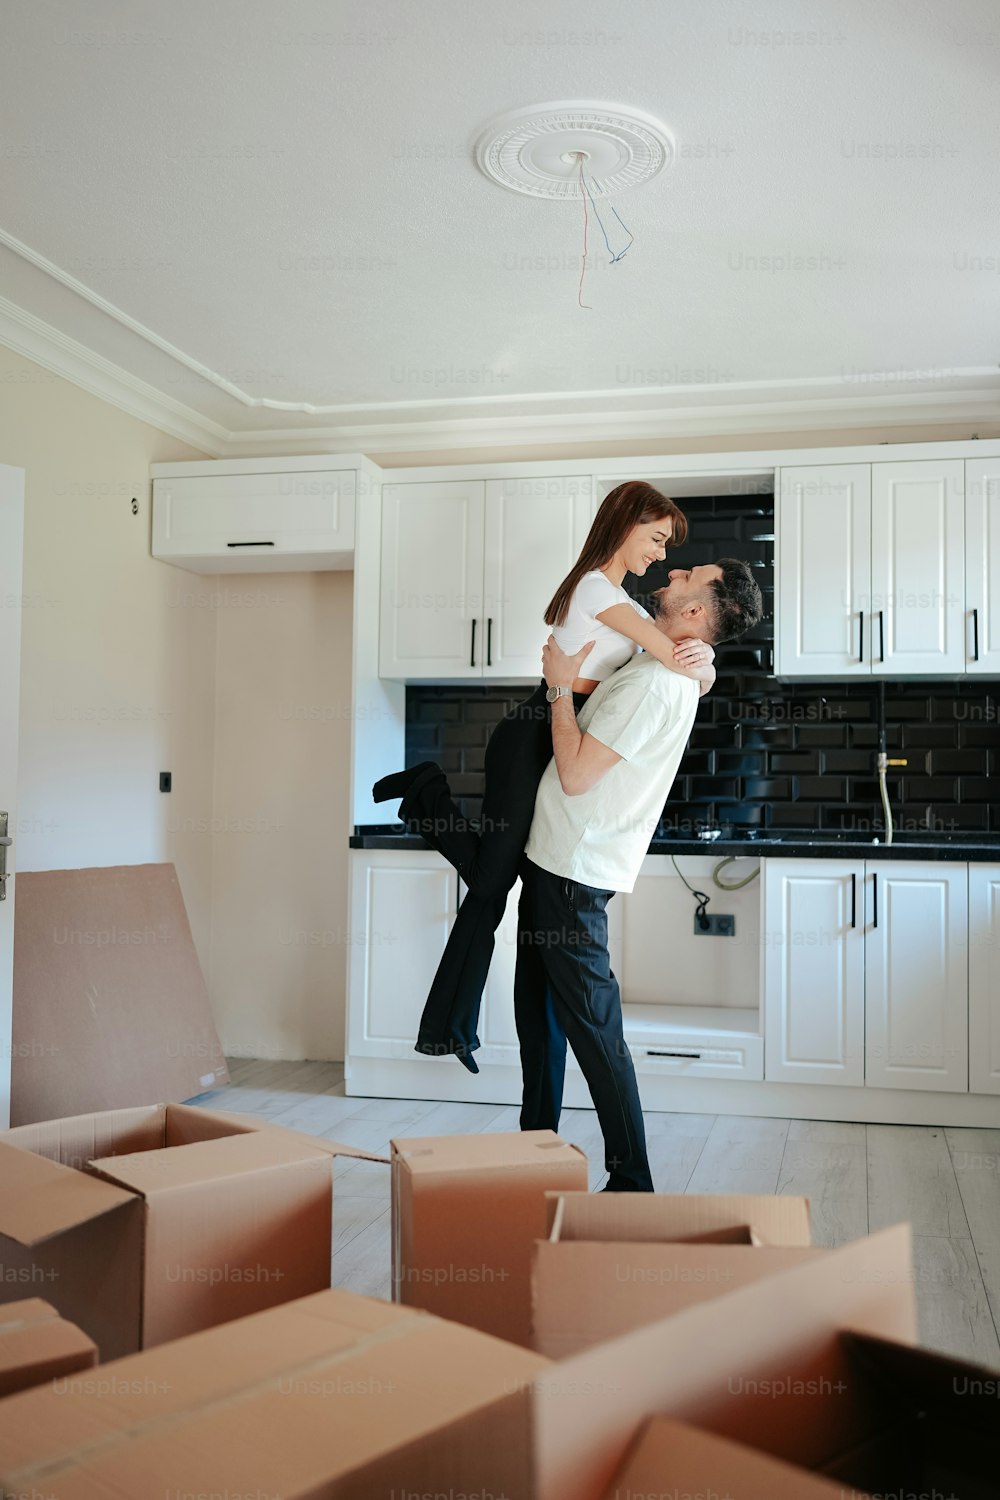 a man carrying a woman in a room full of boxes